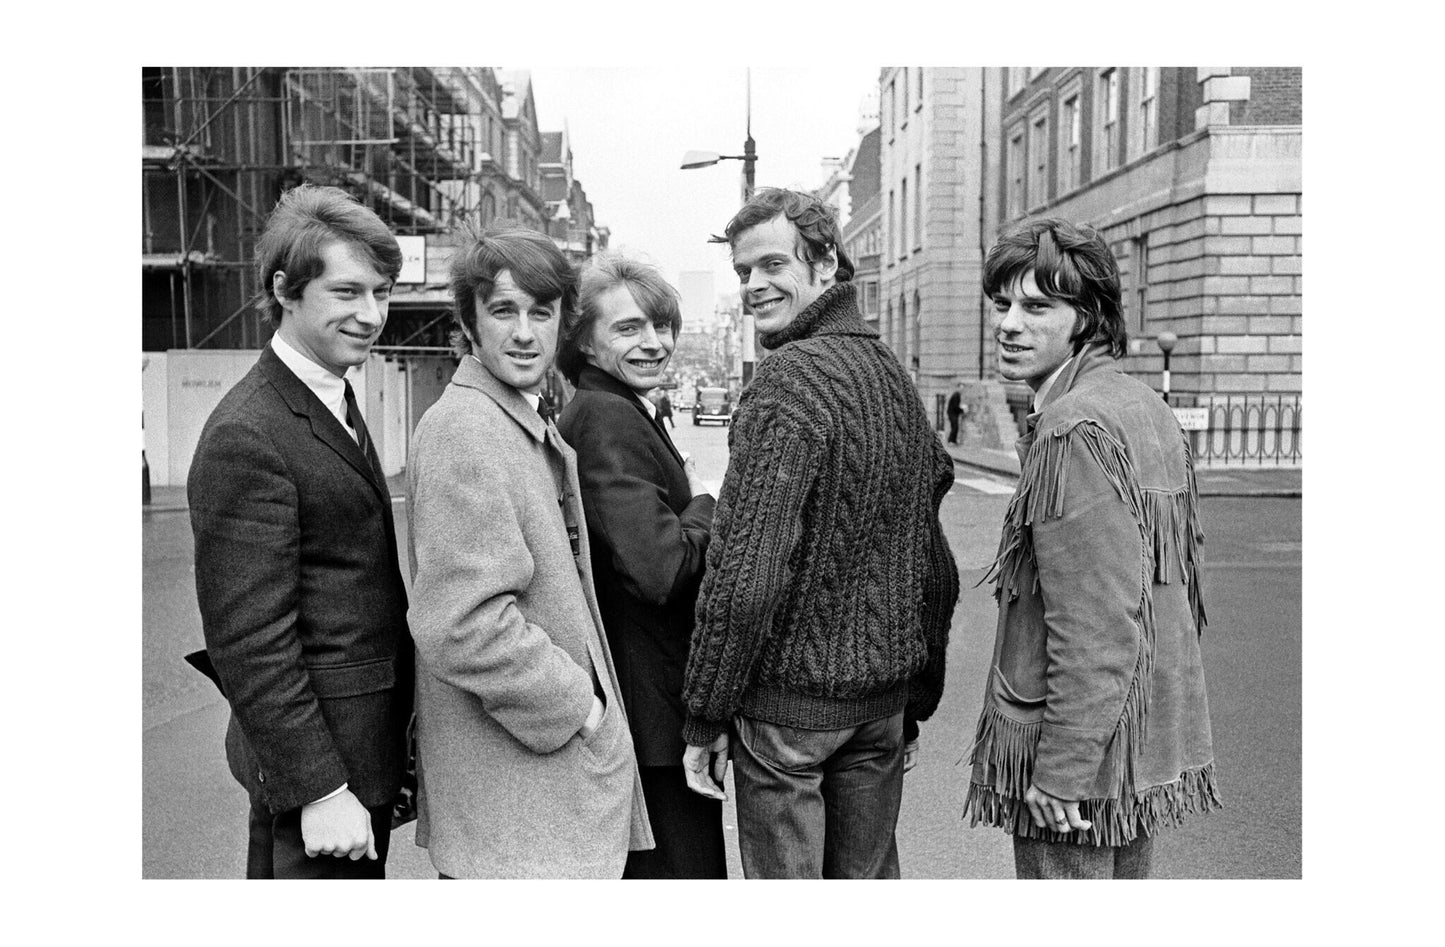 The Yardbirds - Band Smiling in New York, USA, 1966 Print